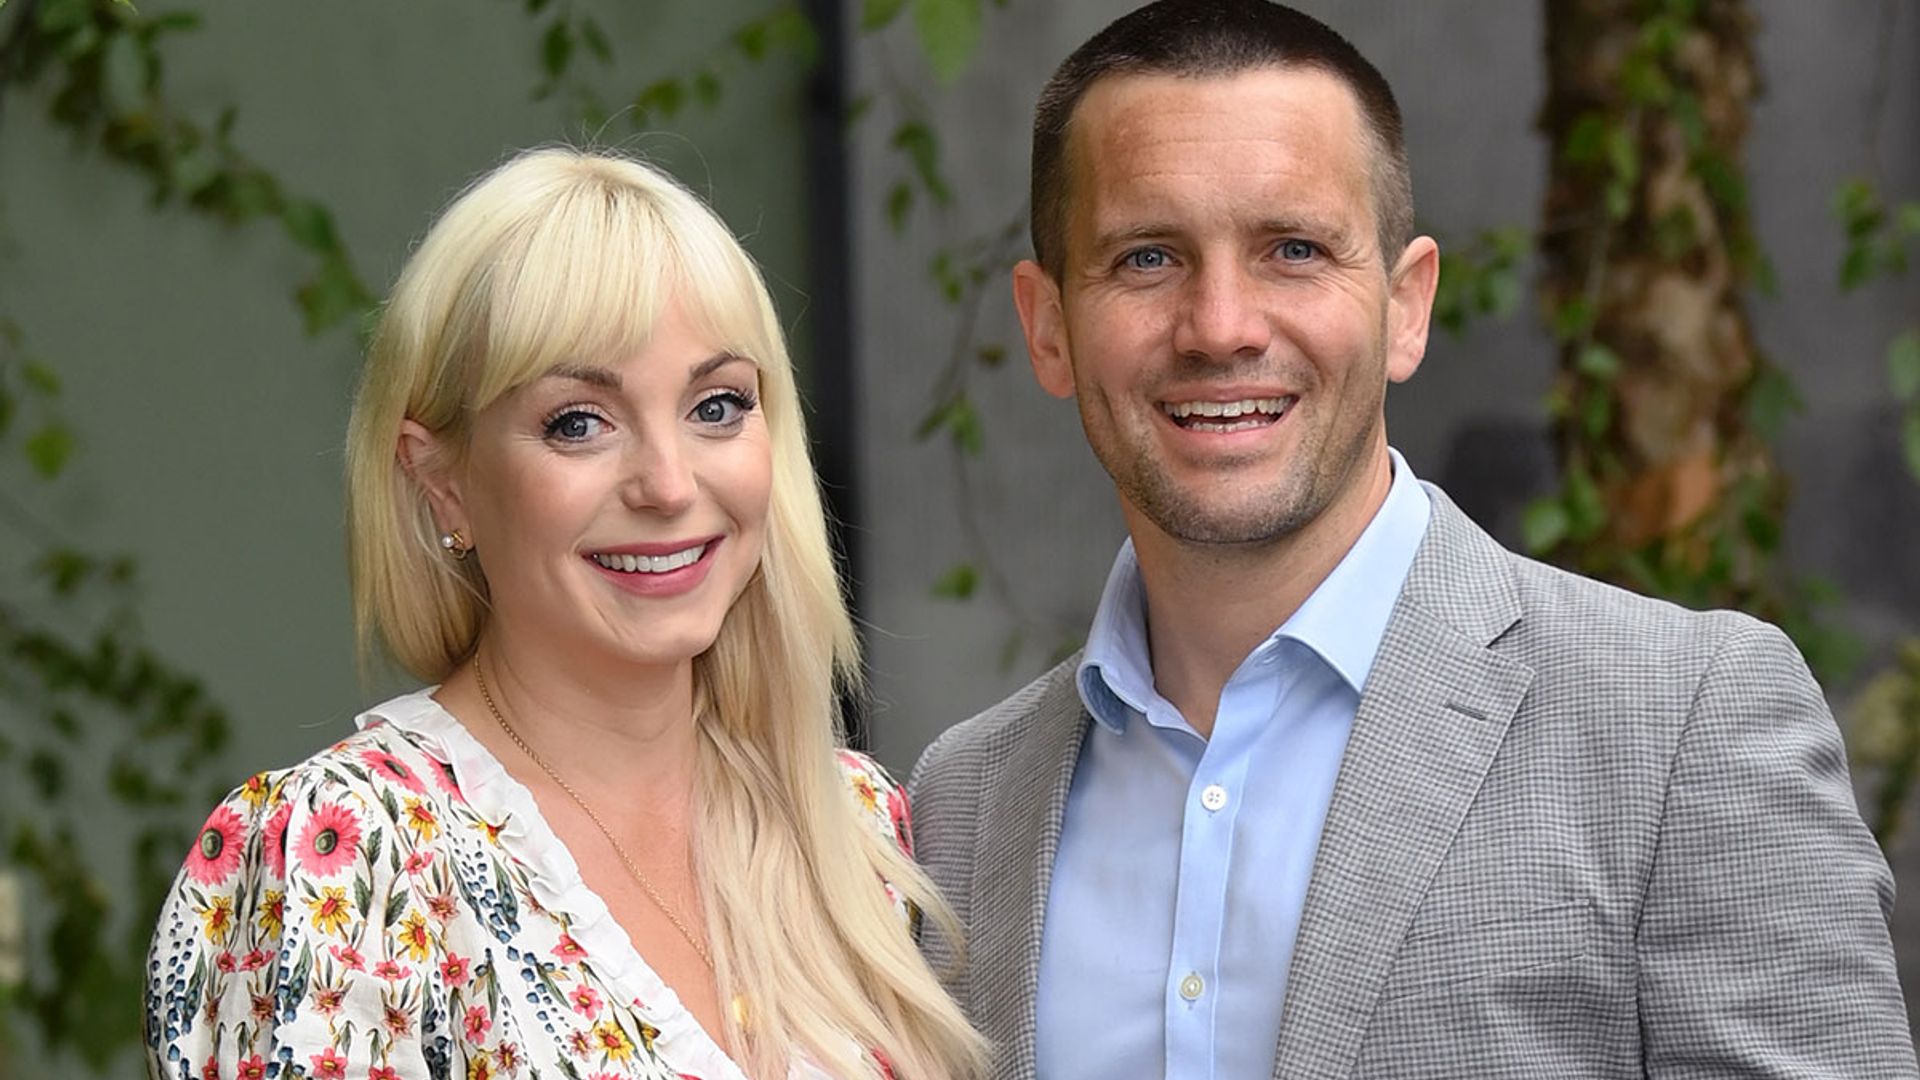 Pregnant Helen George looks glowing in chic floral maxi during Chelsea Flower Show visit with Jack Ashton